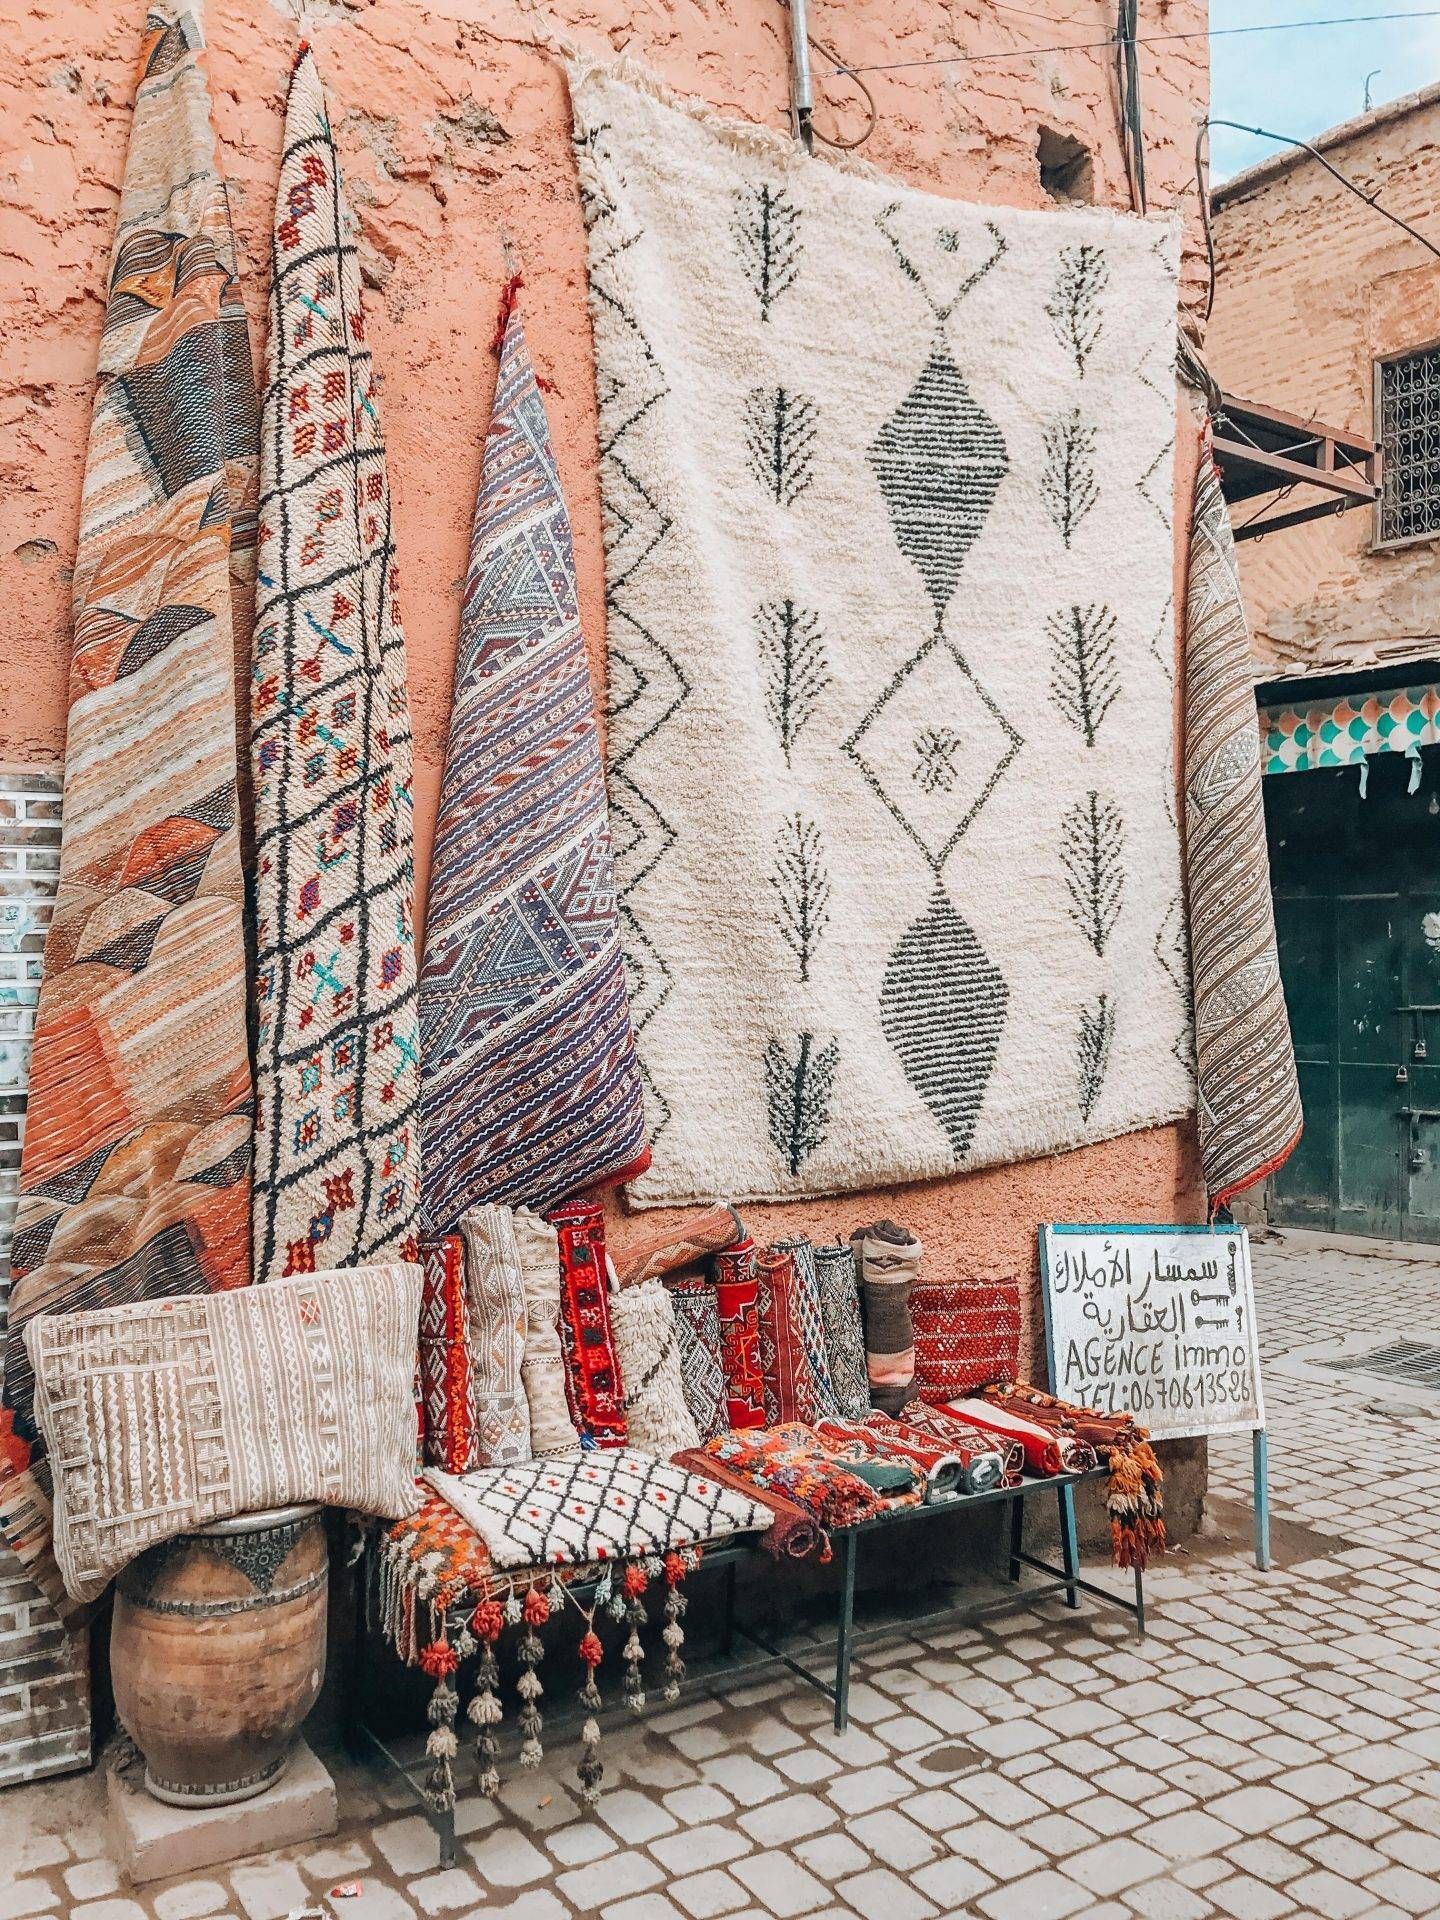 Marrakech in pictures to help you plan your trip. -   19 beauty Pictures adventure ideas